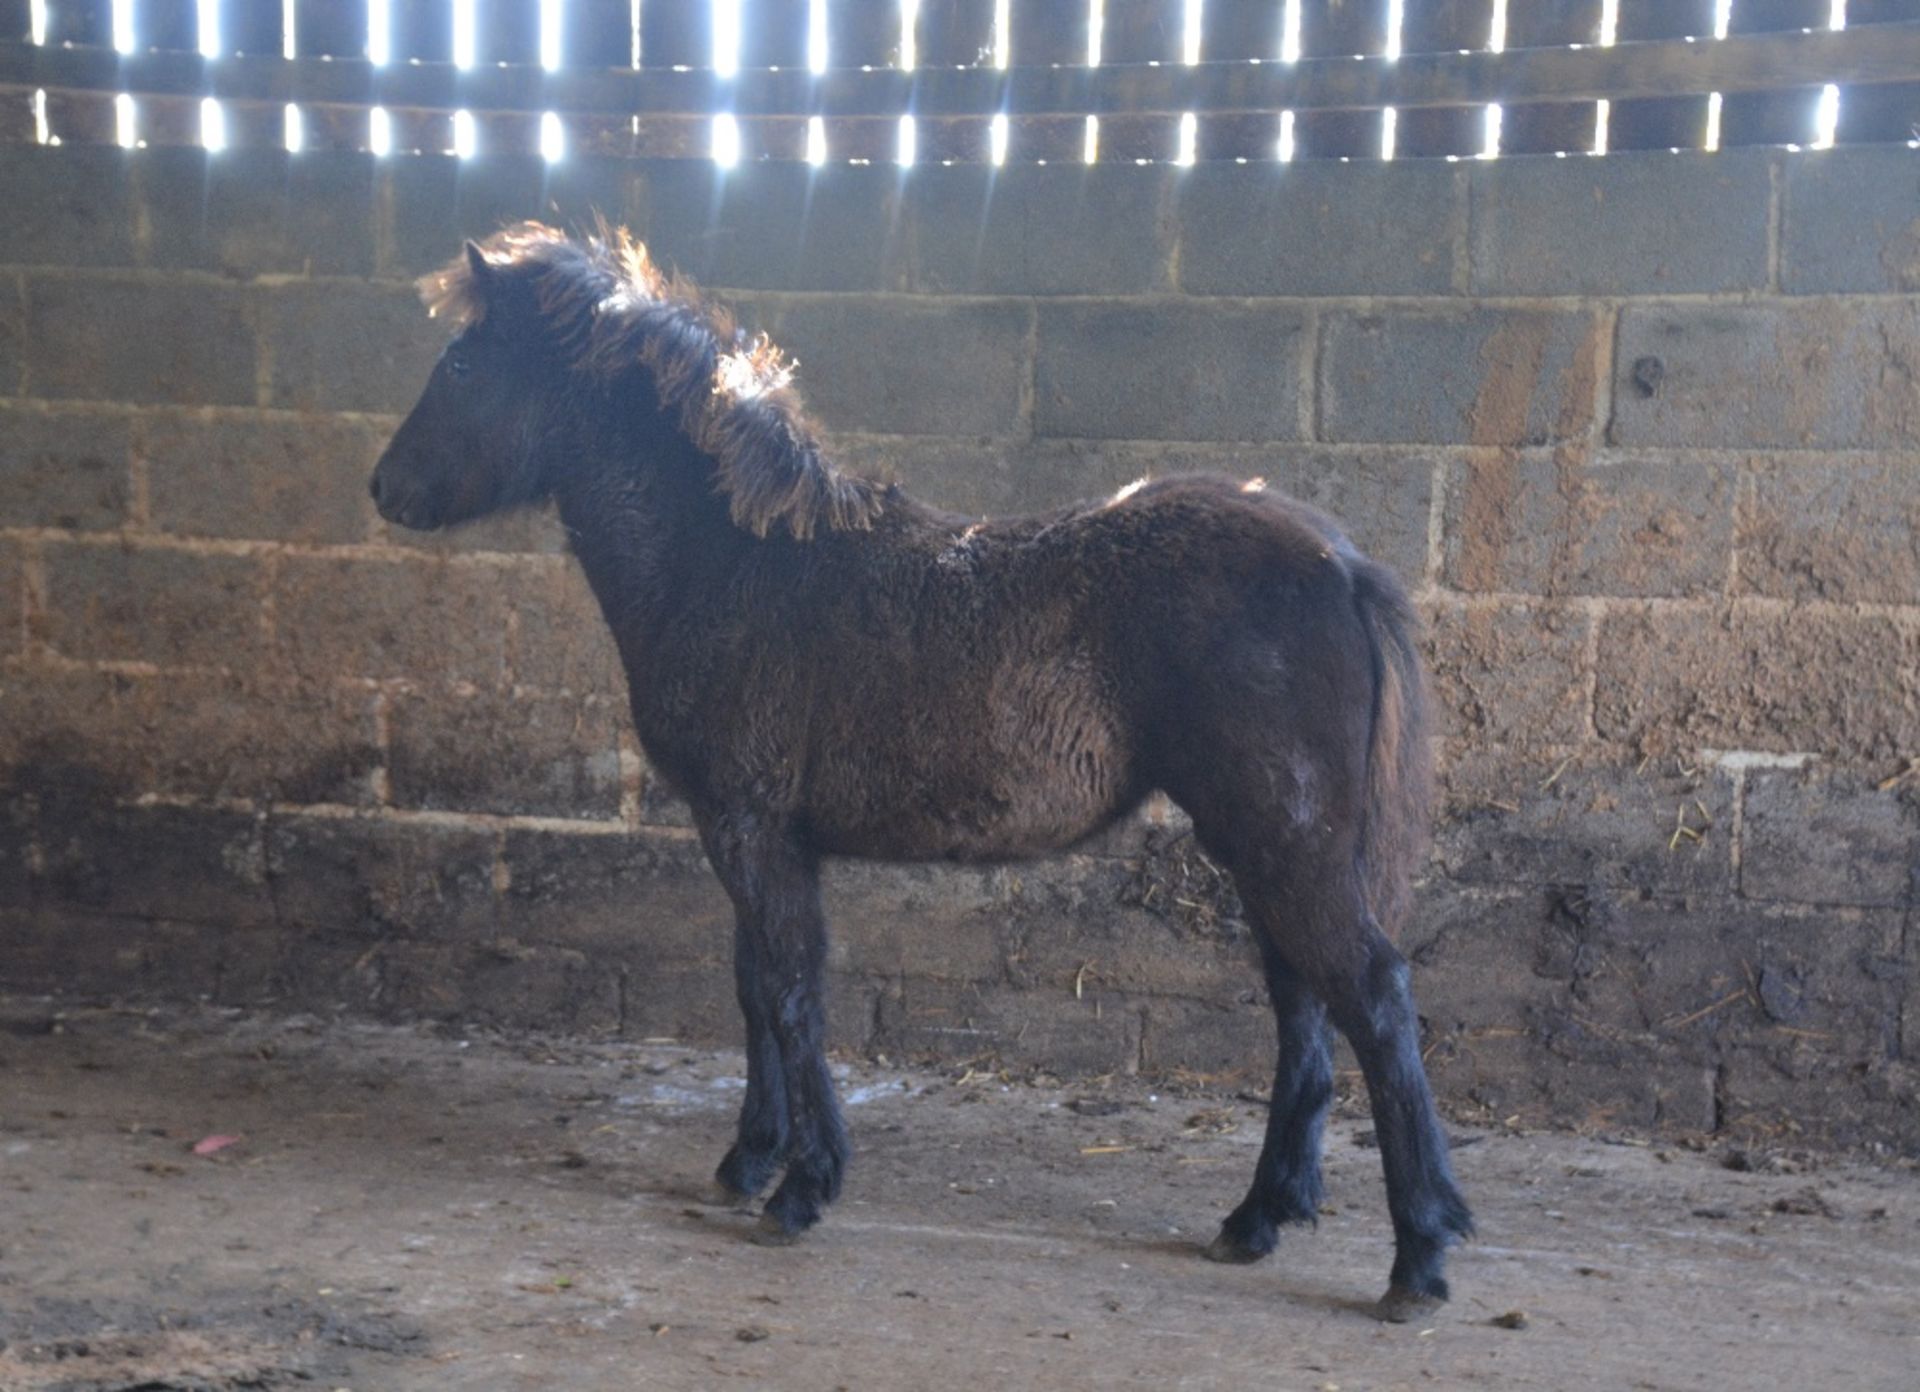 'BLACKATOR KEIRA' DARTMOOR HILL PONY DARK BAY FILLY APPROX 6 MONTHS OLD